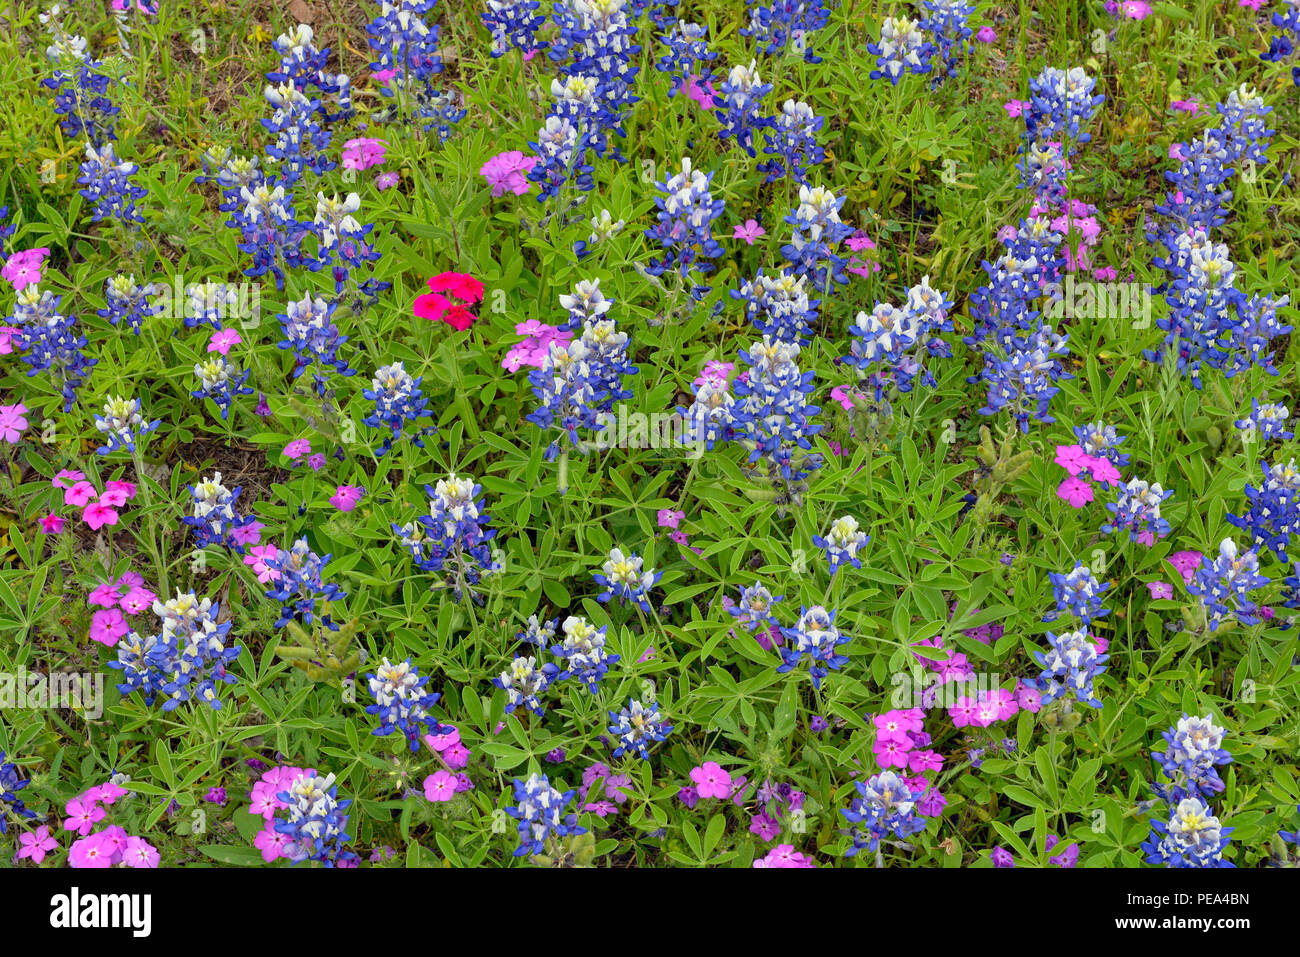 A field with flowering Texas bluebonnet (Lupinus subcarnosus) and phlox, Turkey Bend LCRA, Texas, USA Stock Photo